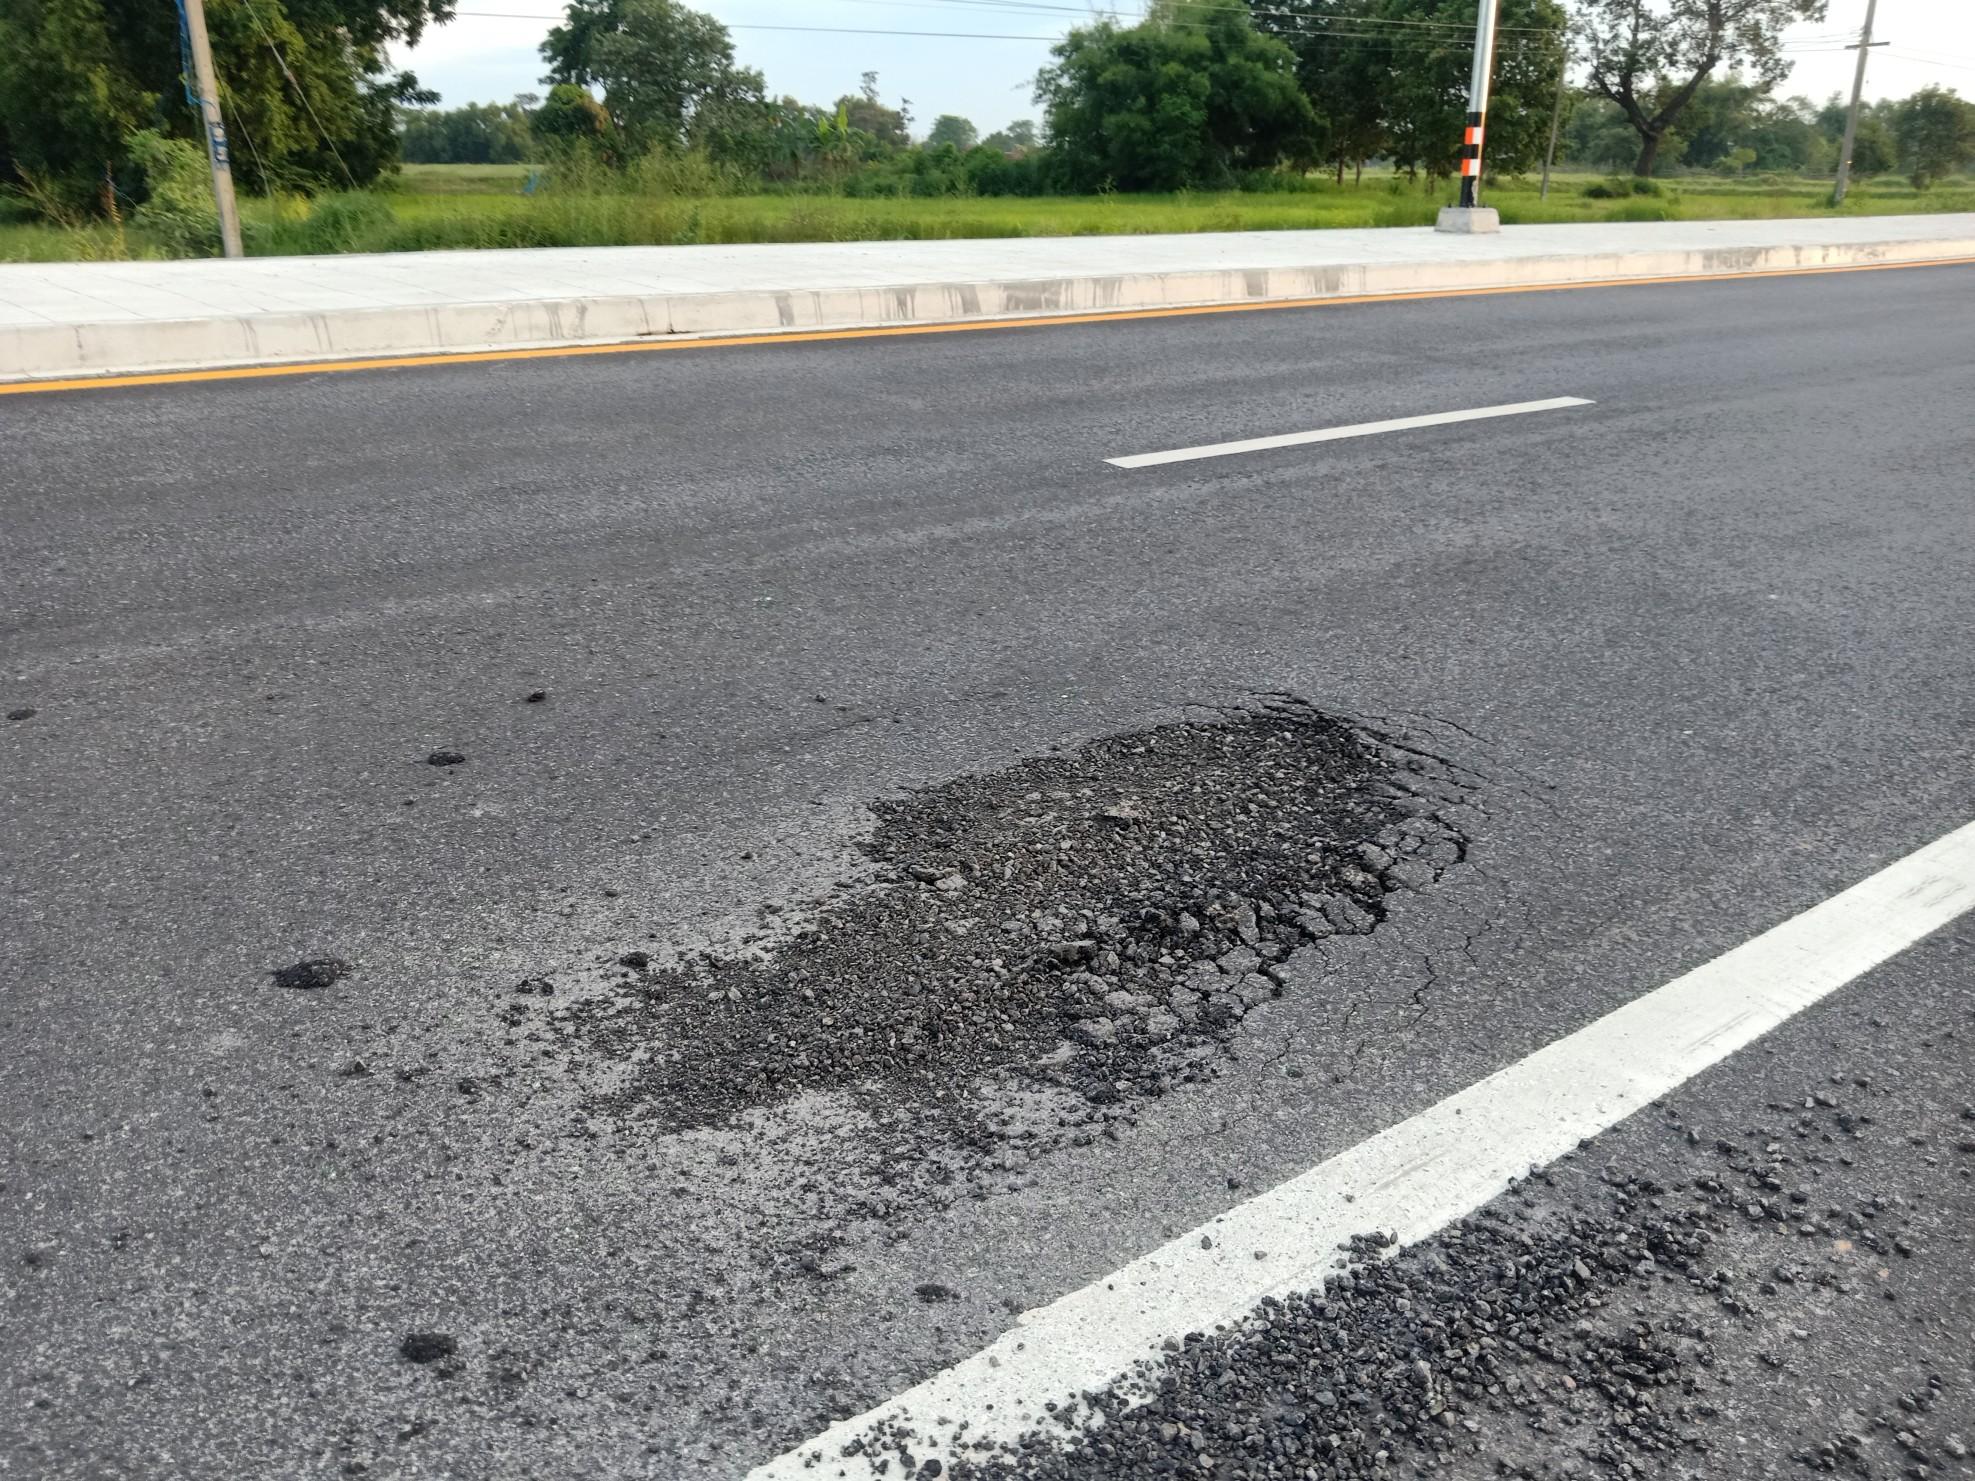 There are a few steps you can take to minimize your contact with potholes.